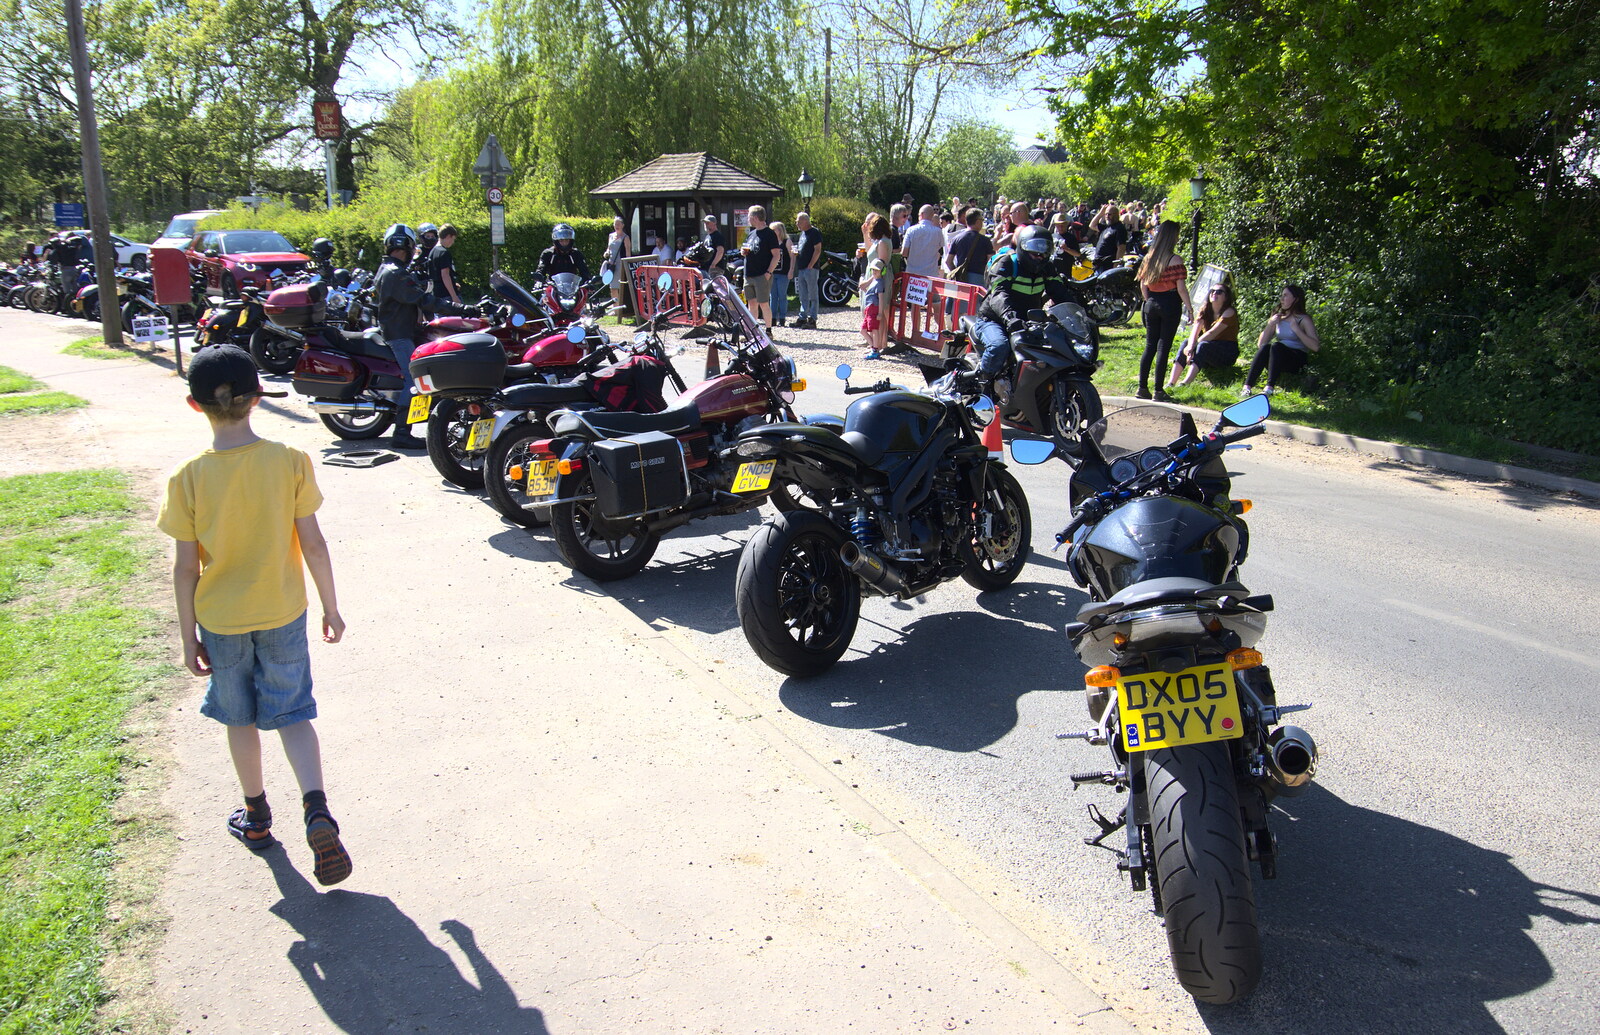 Fred roams around from Beer, Bikes and Bands, Burston Crown, Burston, Norfolk - 6th May 2018